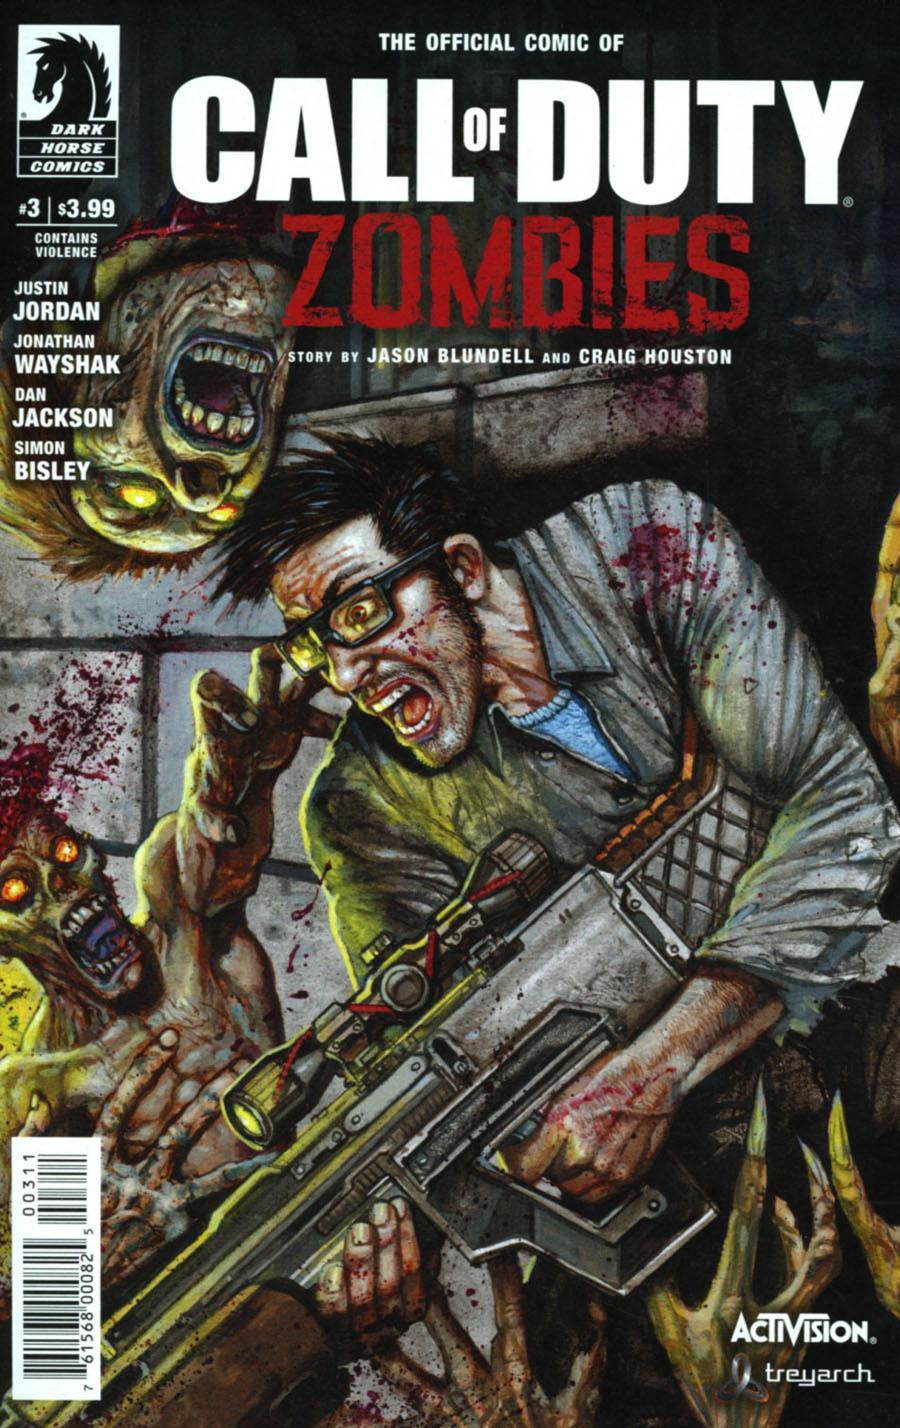 Call Of Duty Zombies Vol. 1 #3